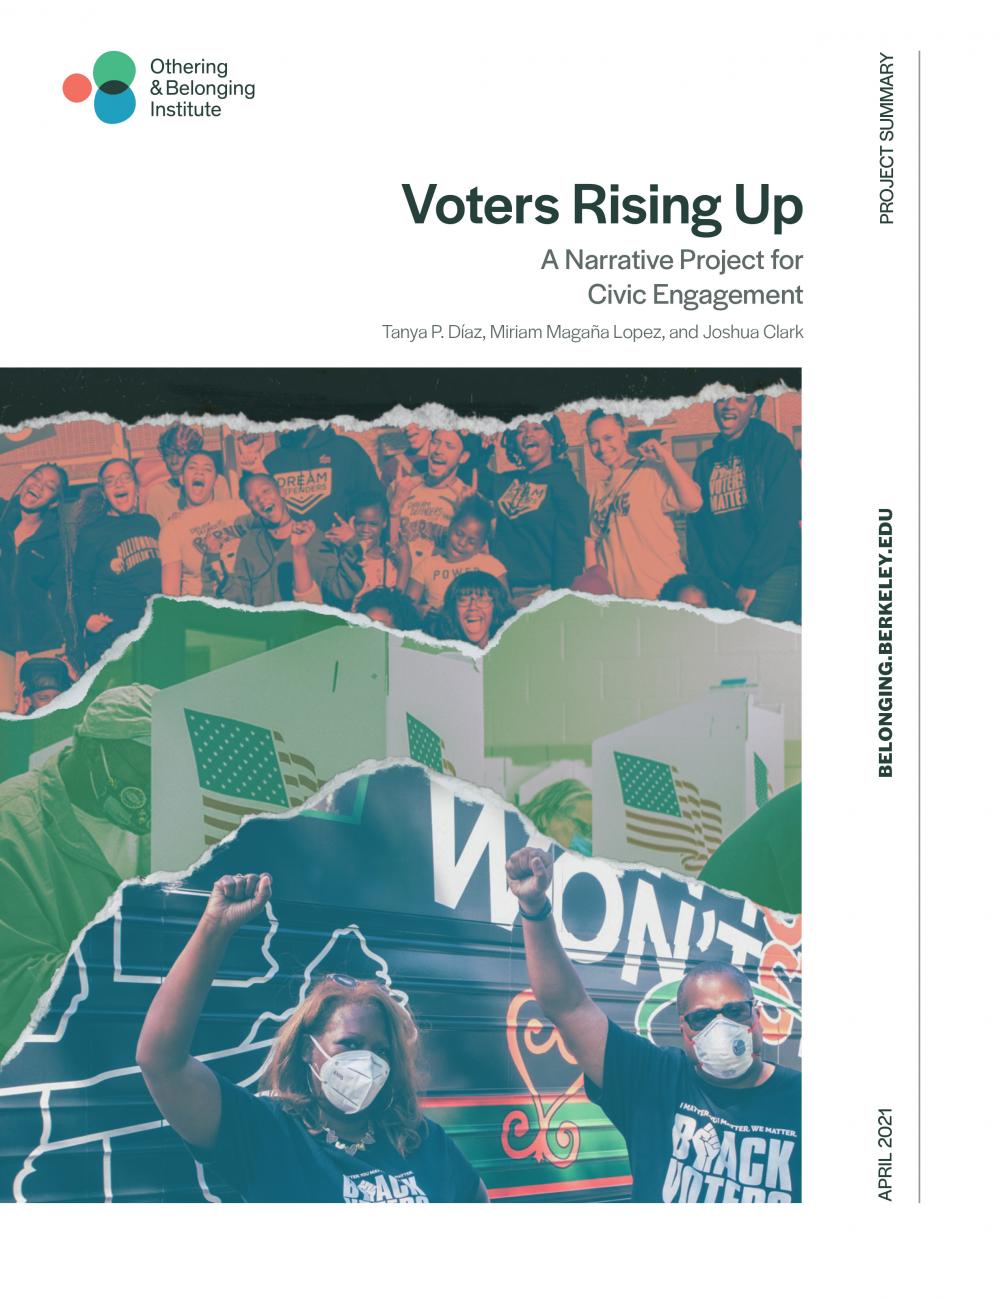 The cover of a report titled "Voters Rising Up" authored by Tanya Díaz, Miriam Magaña Lopez, and Joshua Clark. The cover has a white background with green text overset, and prominently features a collage of images of voters and activists.